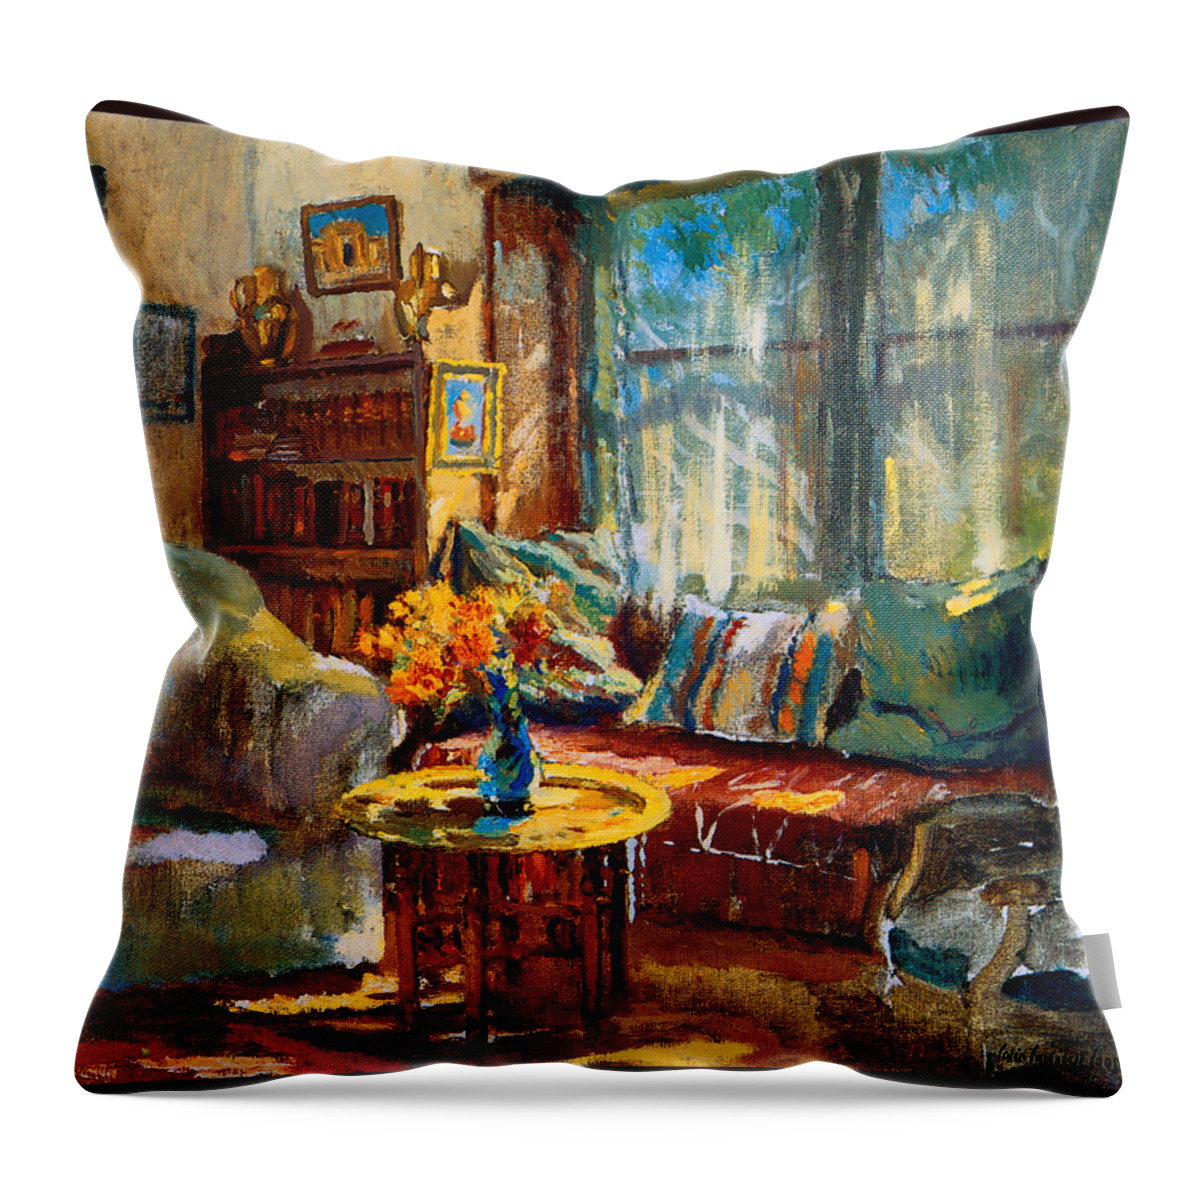 Cooper Throw Pillow featuring the painting Cottage Interior by Colin Campbell Cooper